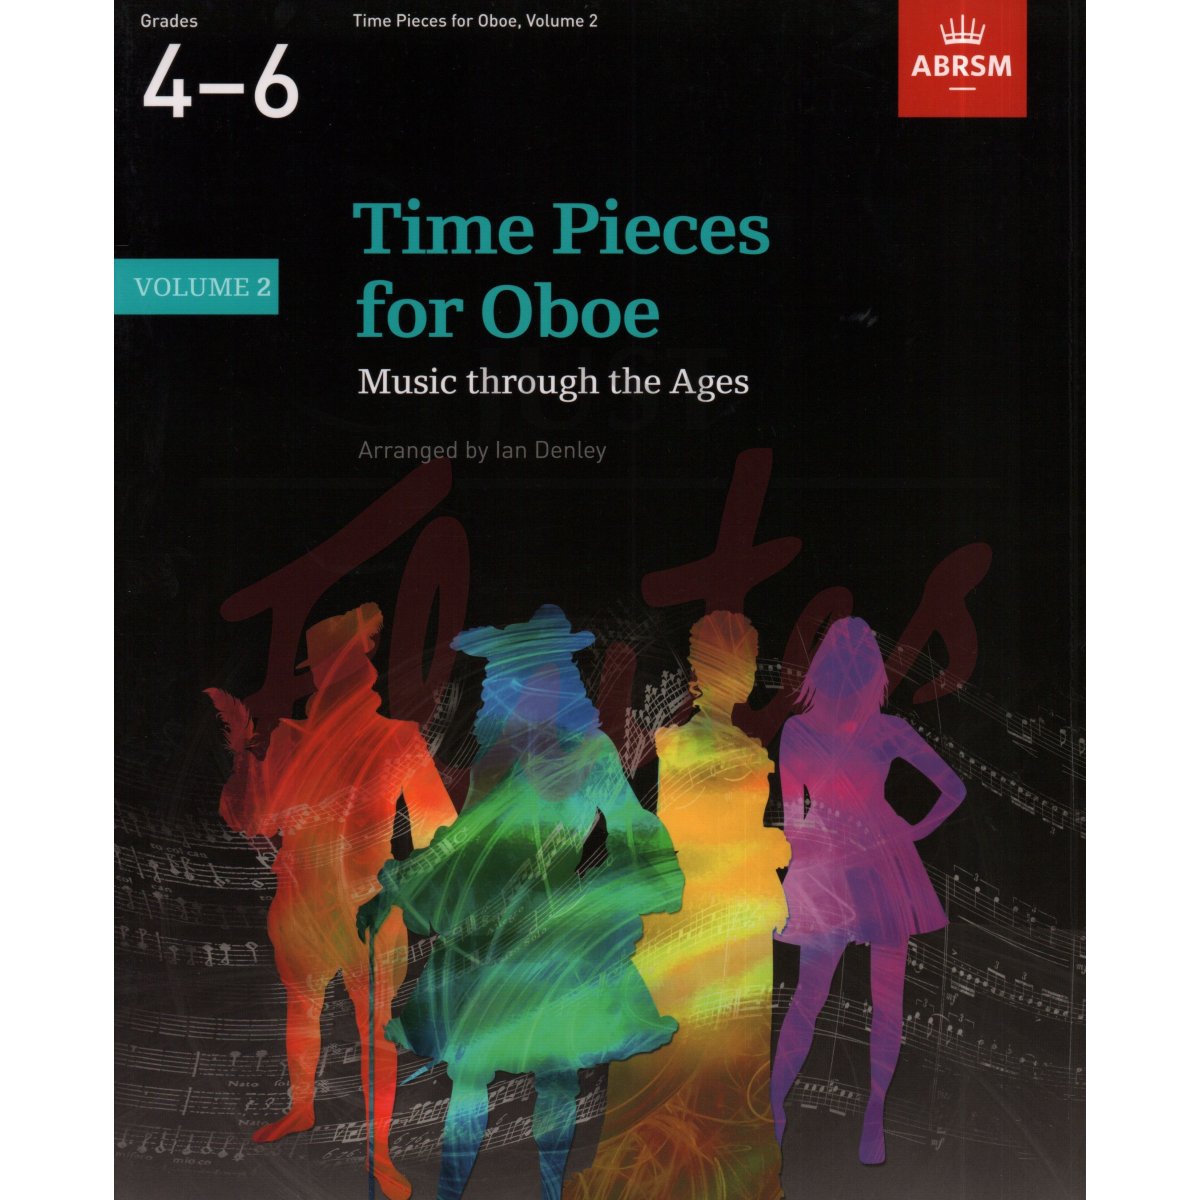 Time Pieces for Oboe Vol 2